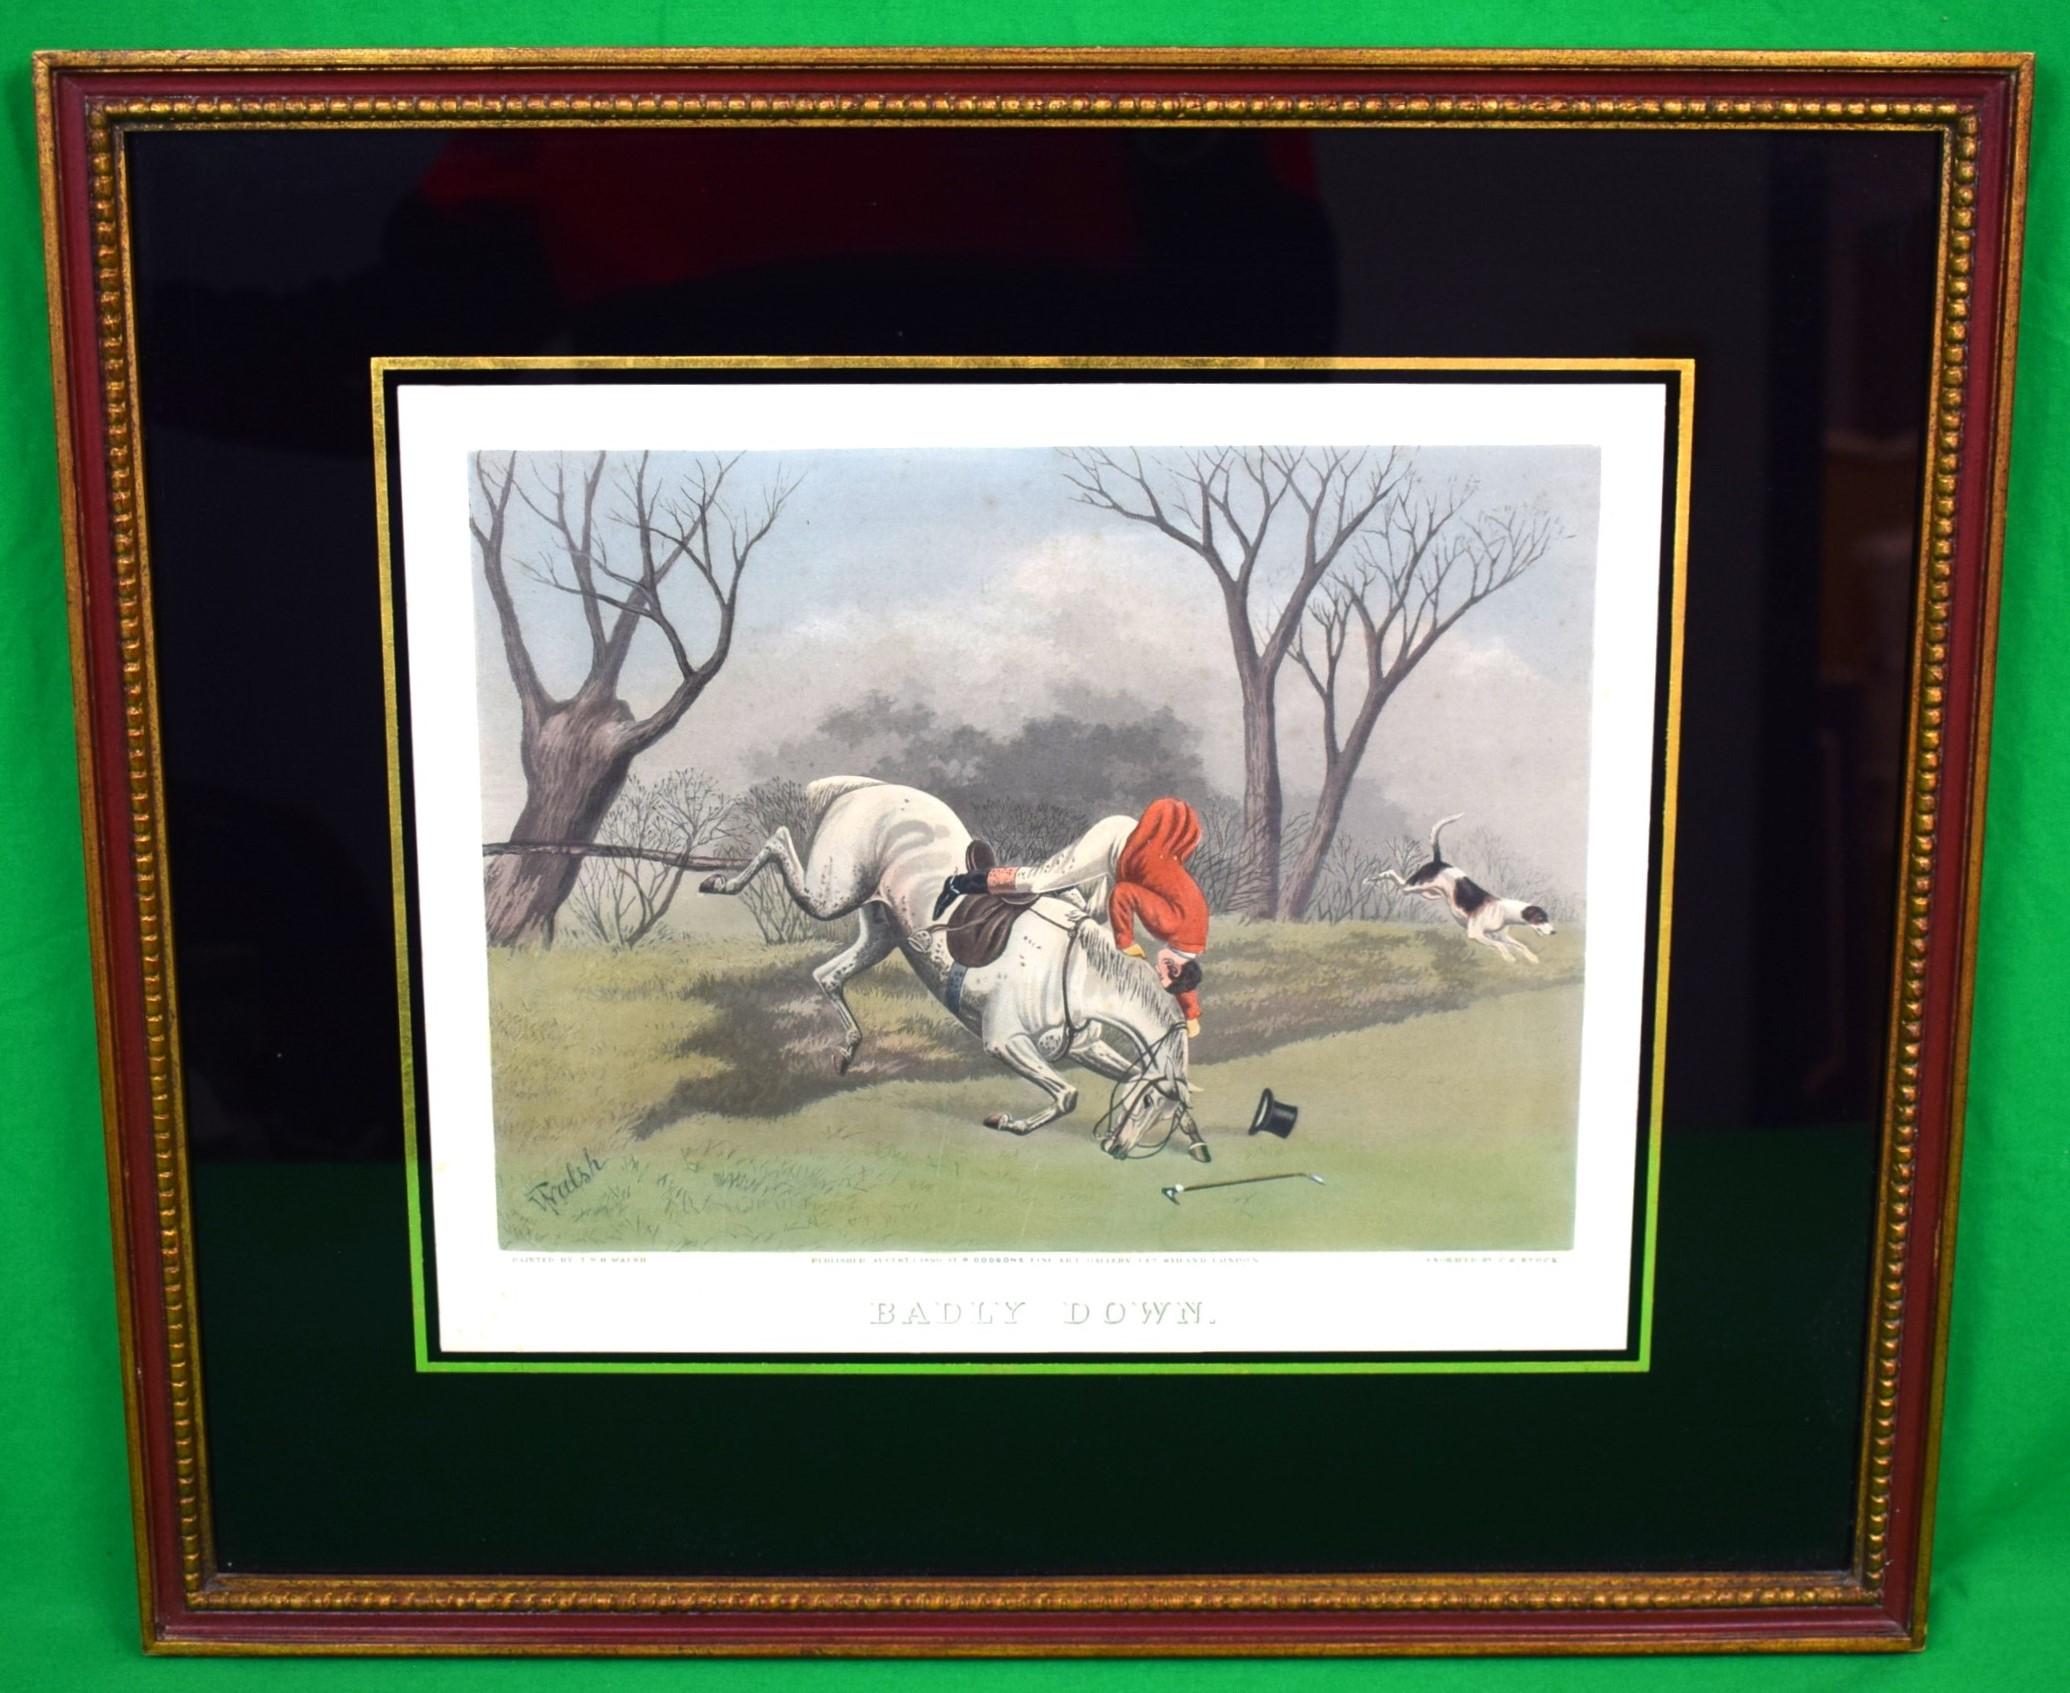 Art Sz: 10 5/8"H x 13 1/8"

Frame Sz: 17 5/8"H x 20"W

In eglomise mat

Engraved by C.R. Stock